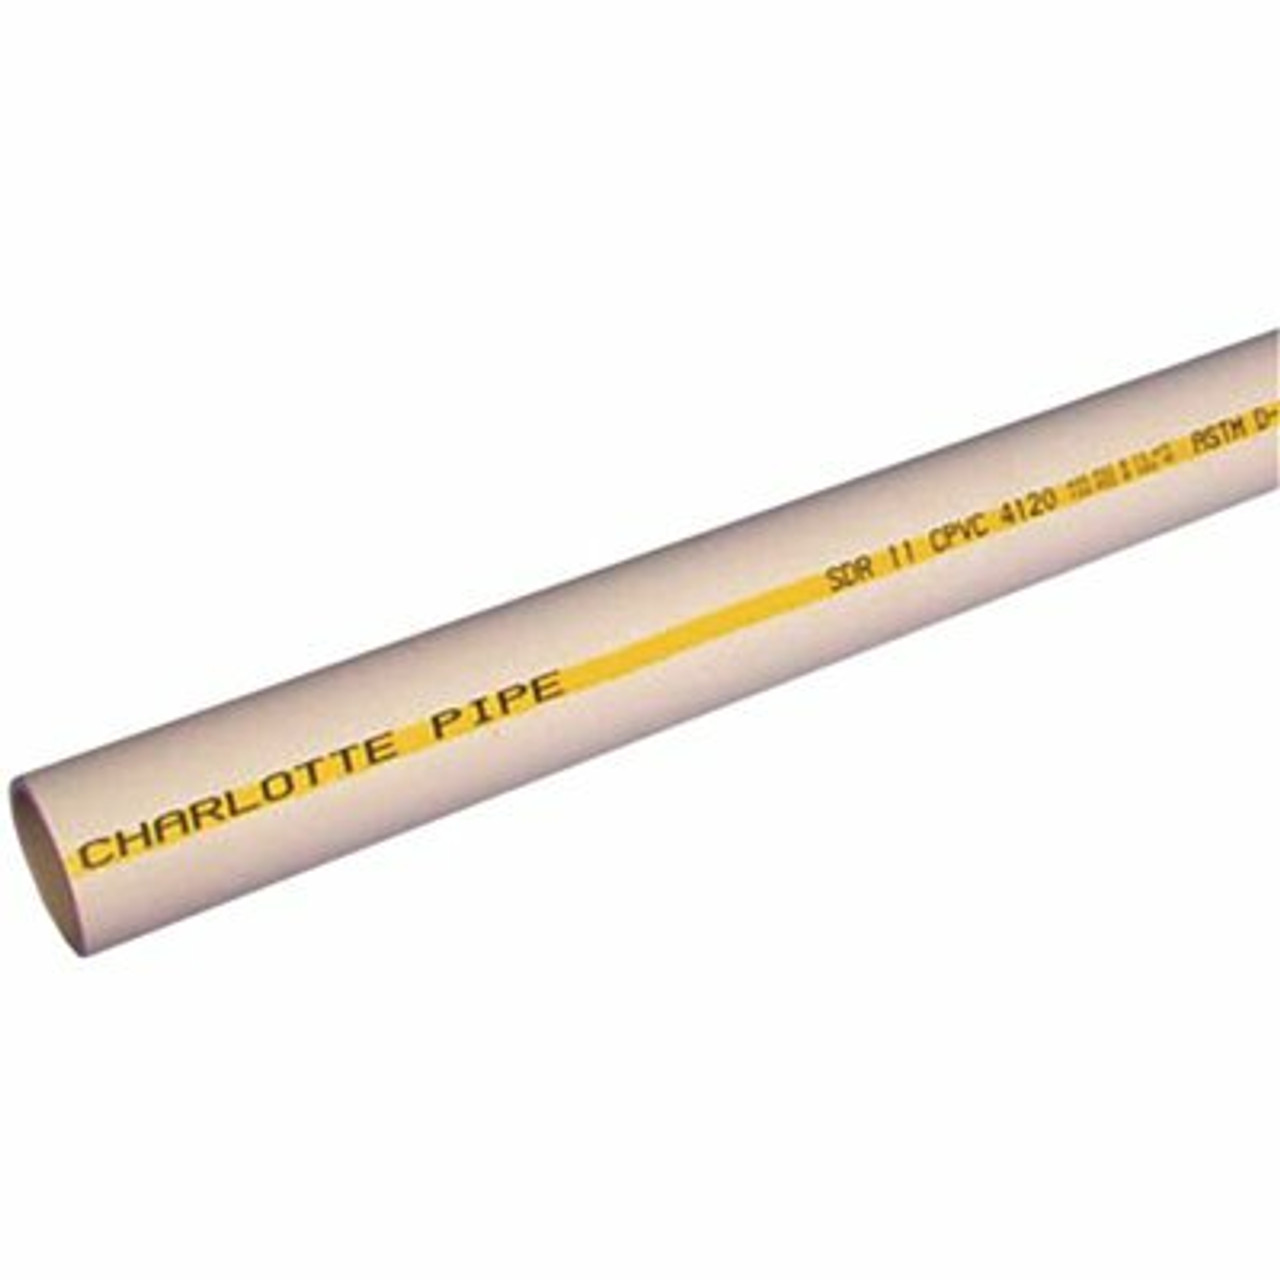 Charlotte Pipe 1/2 In. X 10 Ft. Cpvc Sdr11 Flow Guard Gold Pipe